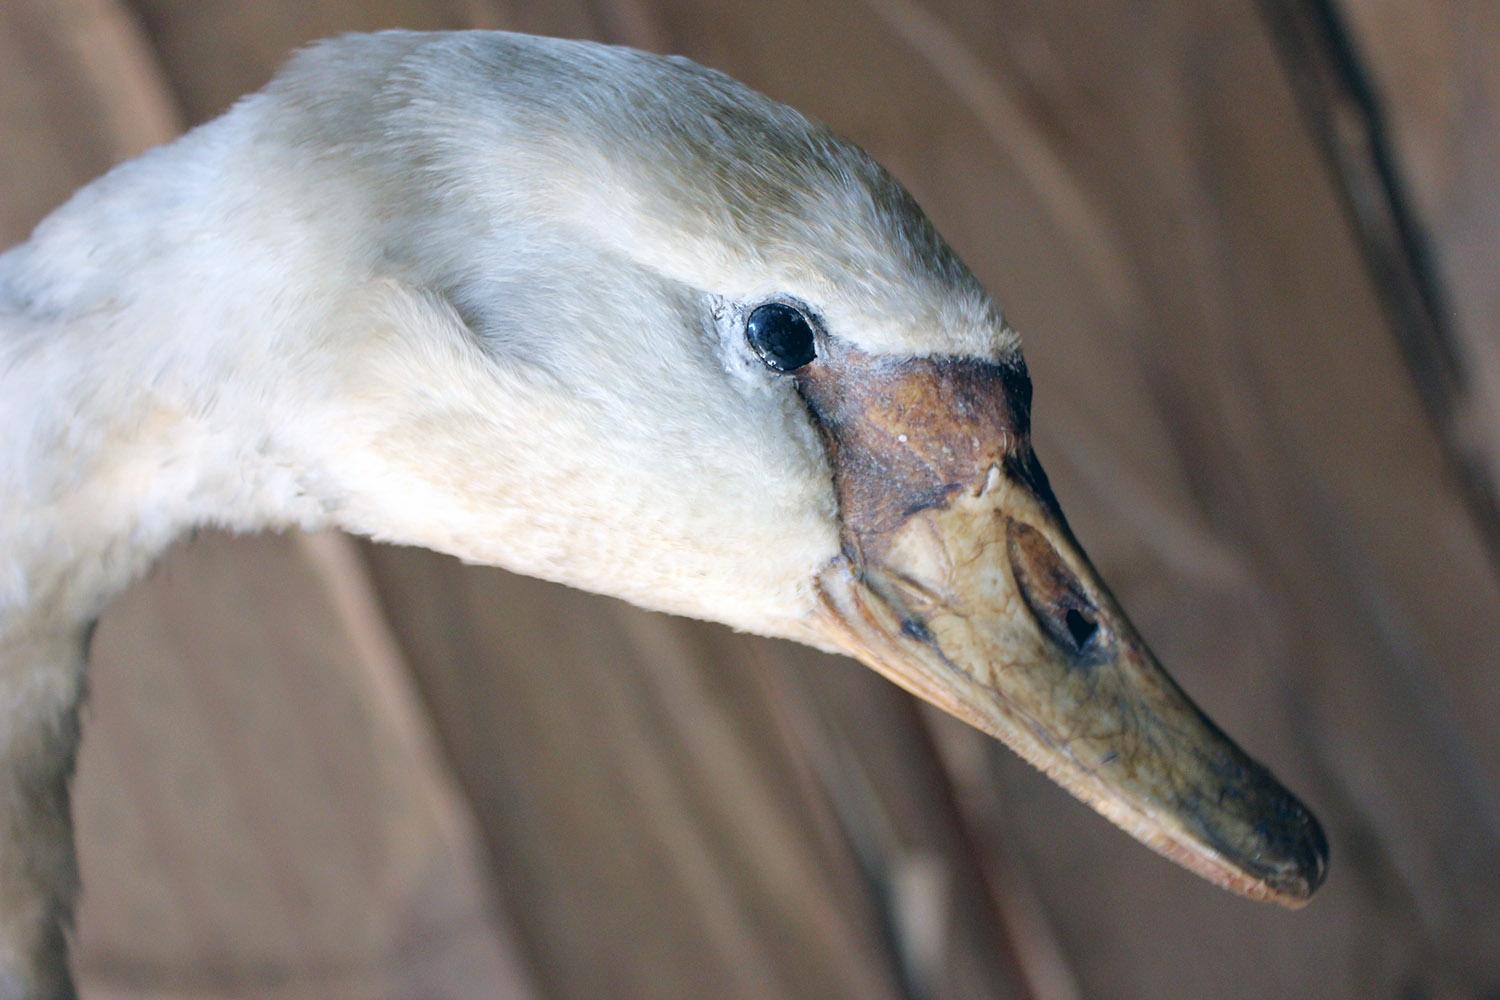 Late Victorian Large Mature 19th Century Taxidermy Mute Swan, circa 1900